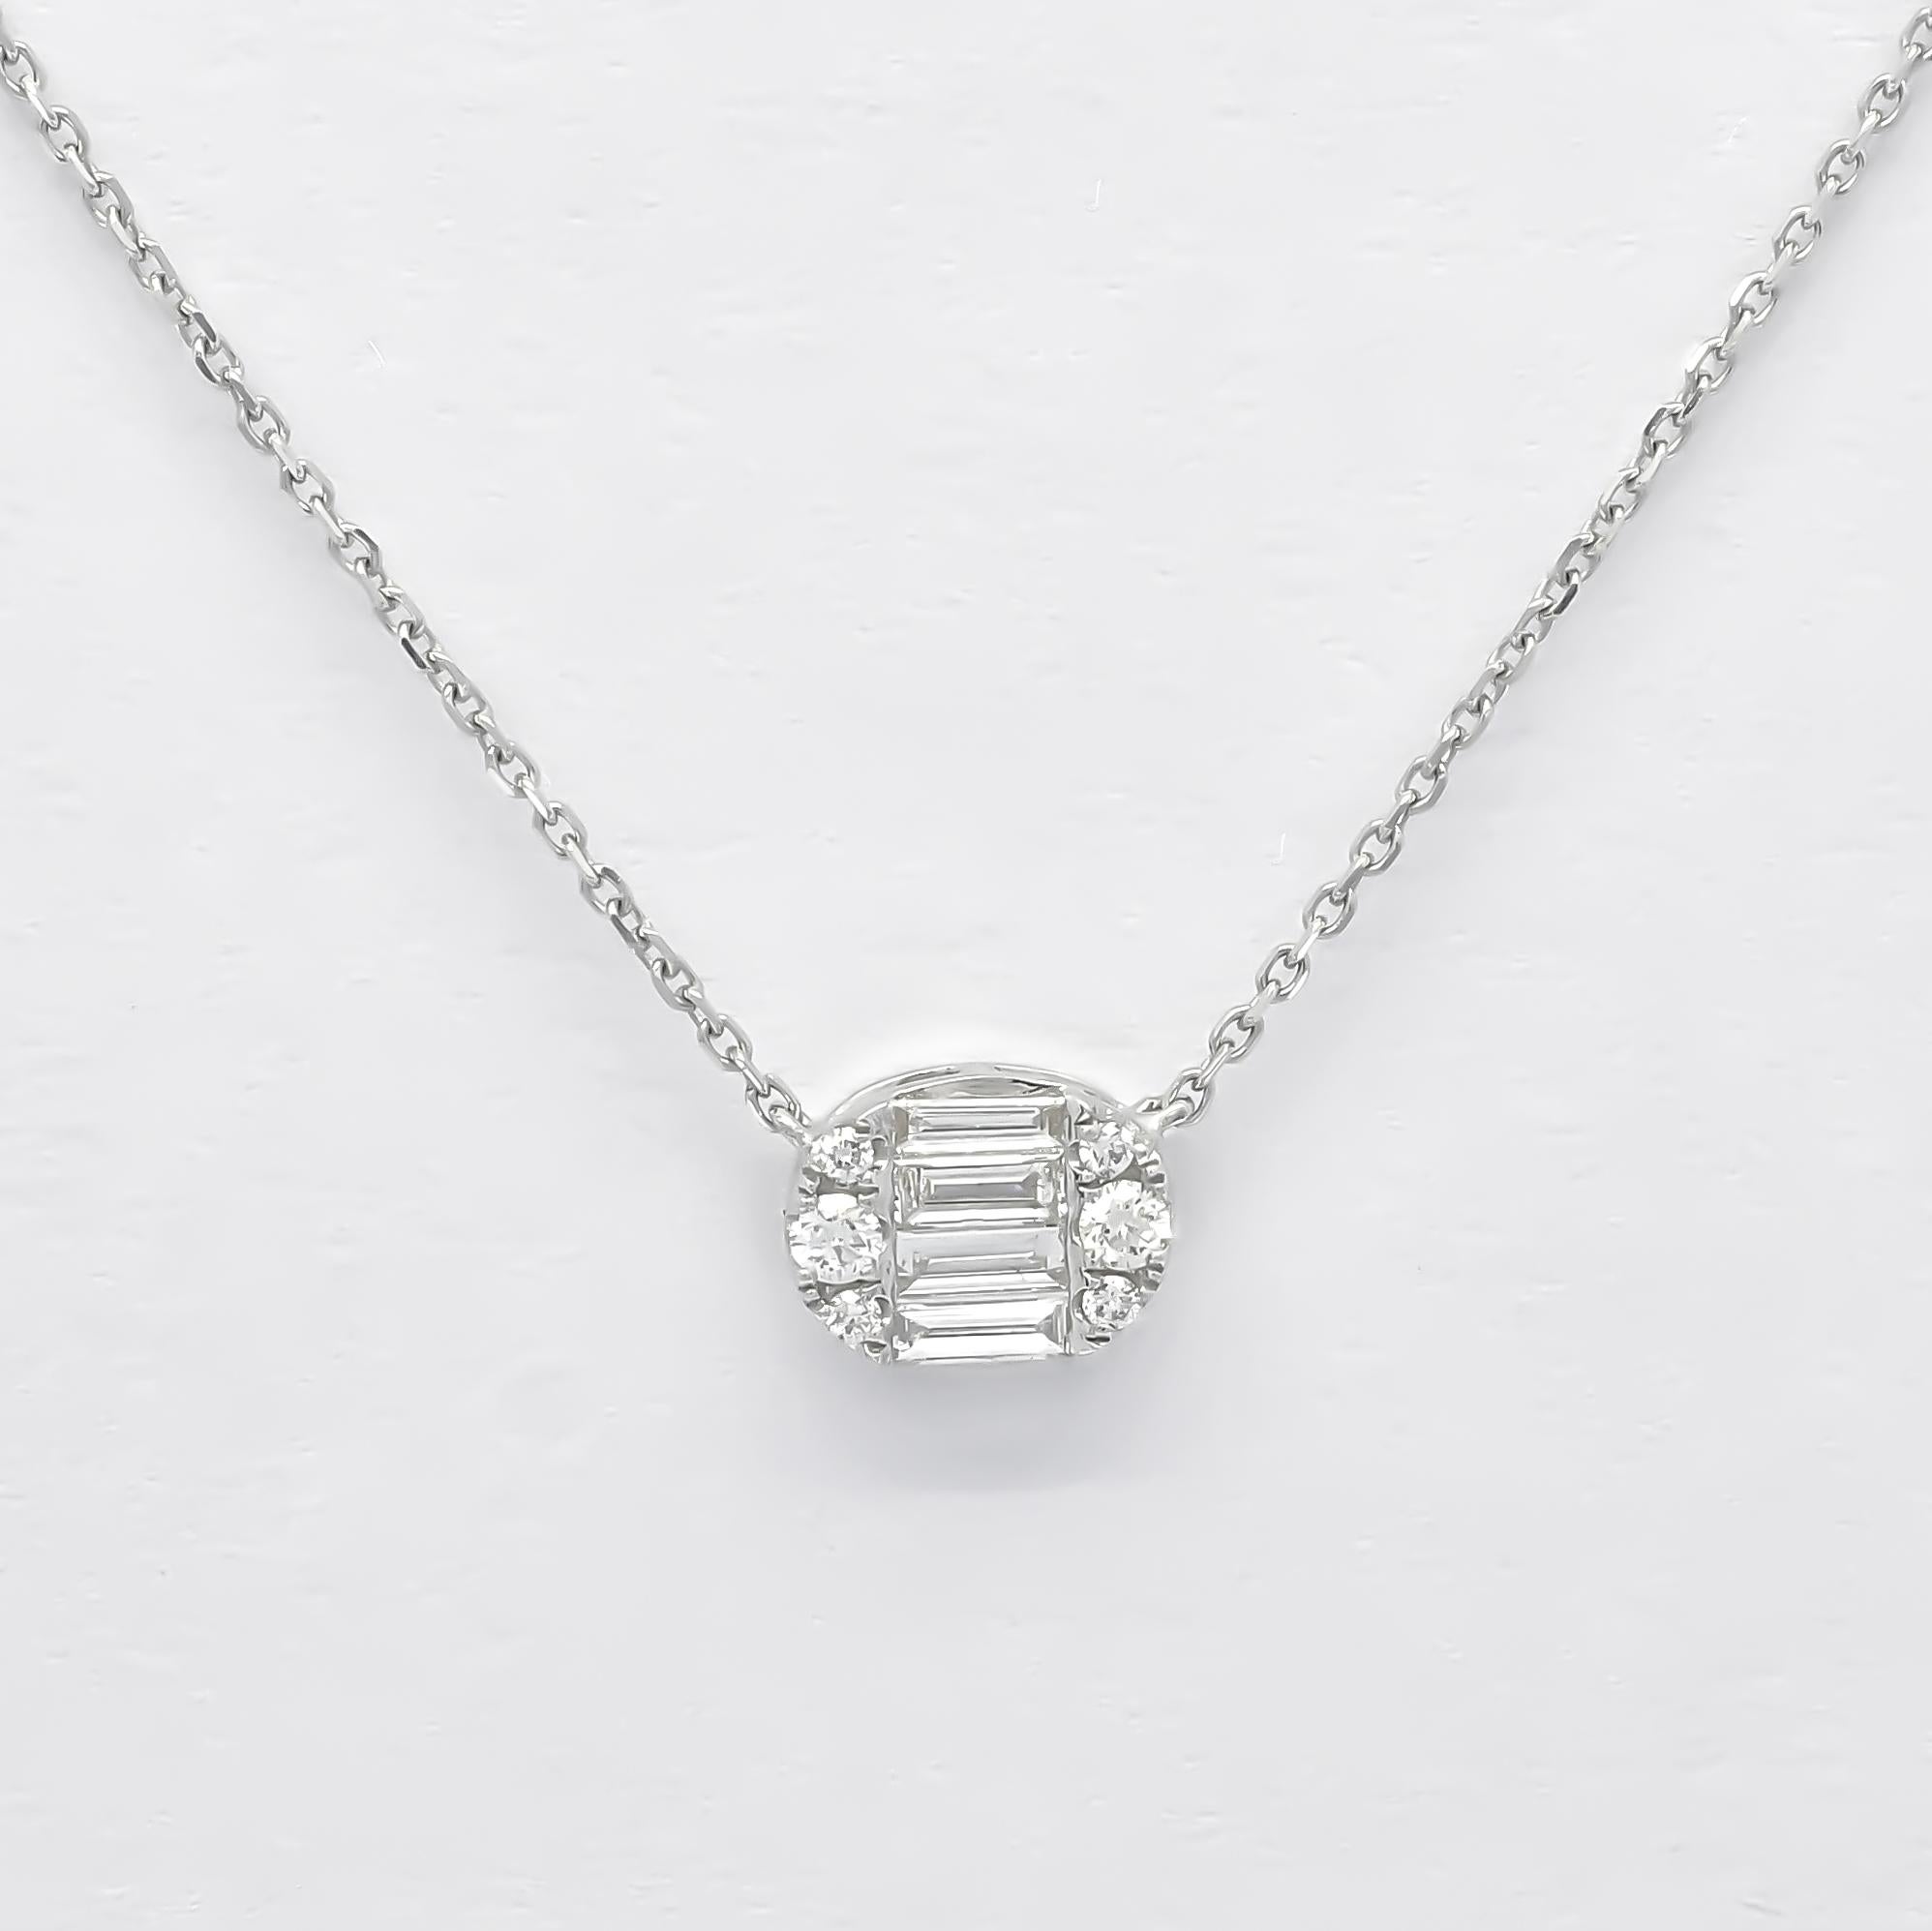 Modern Natural Diamond Pendant 0.40 cts 18KT White Gold Oval Shape Chain Necklace   For Sale